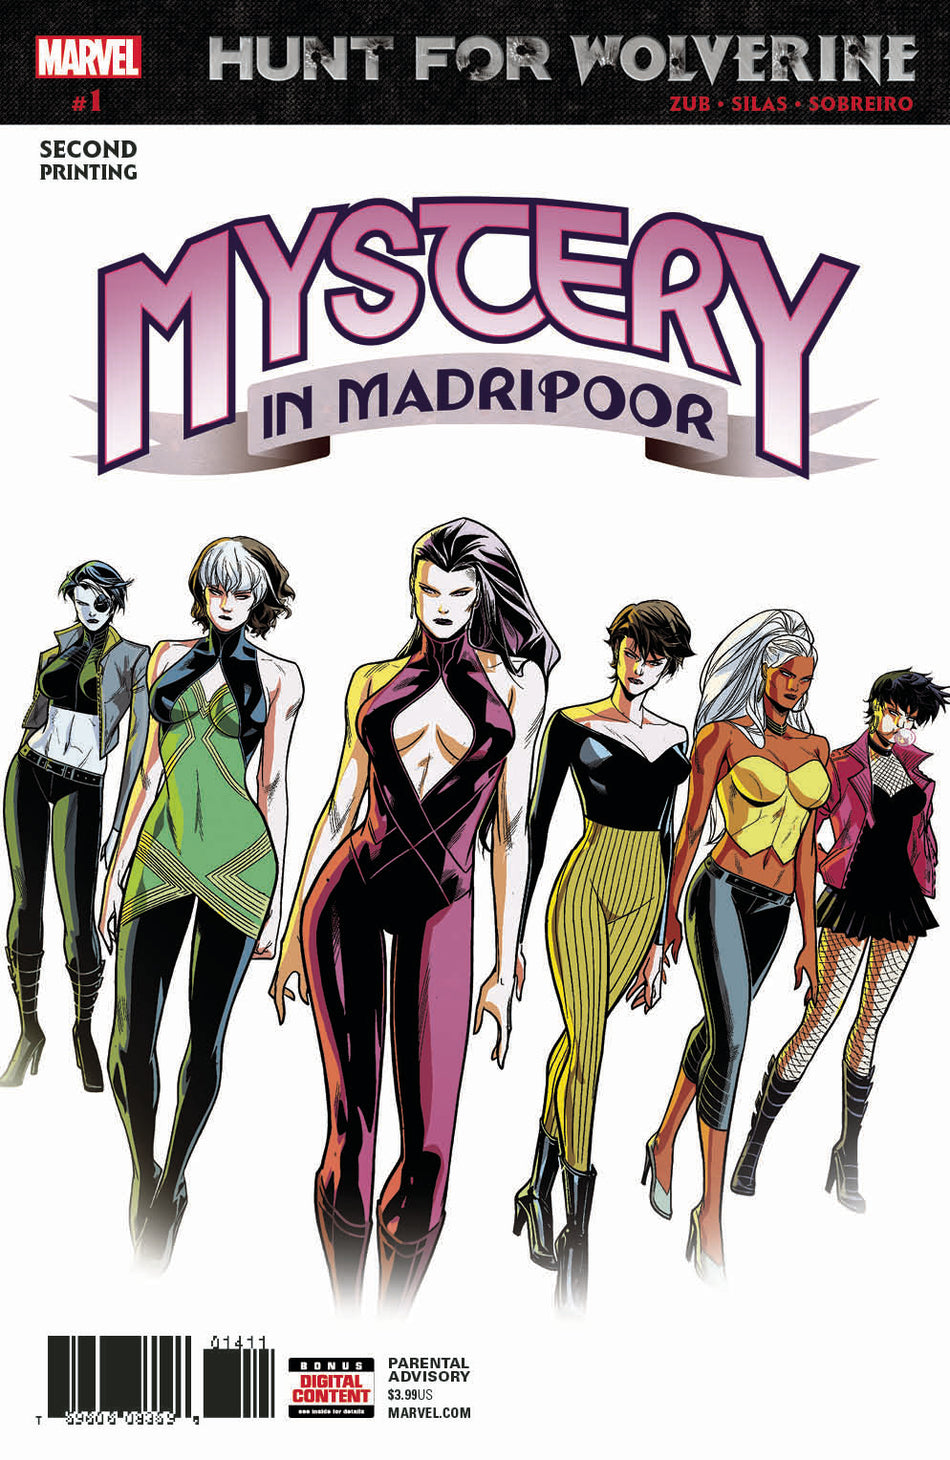 Photo of Hunt for Wolverine Mystery Madripoor #1 (of 4) 2nd Ptg Silas comic sold by Stronghold Collectibles